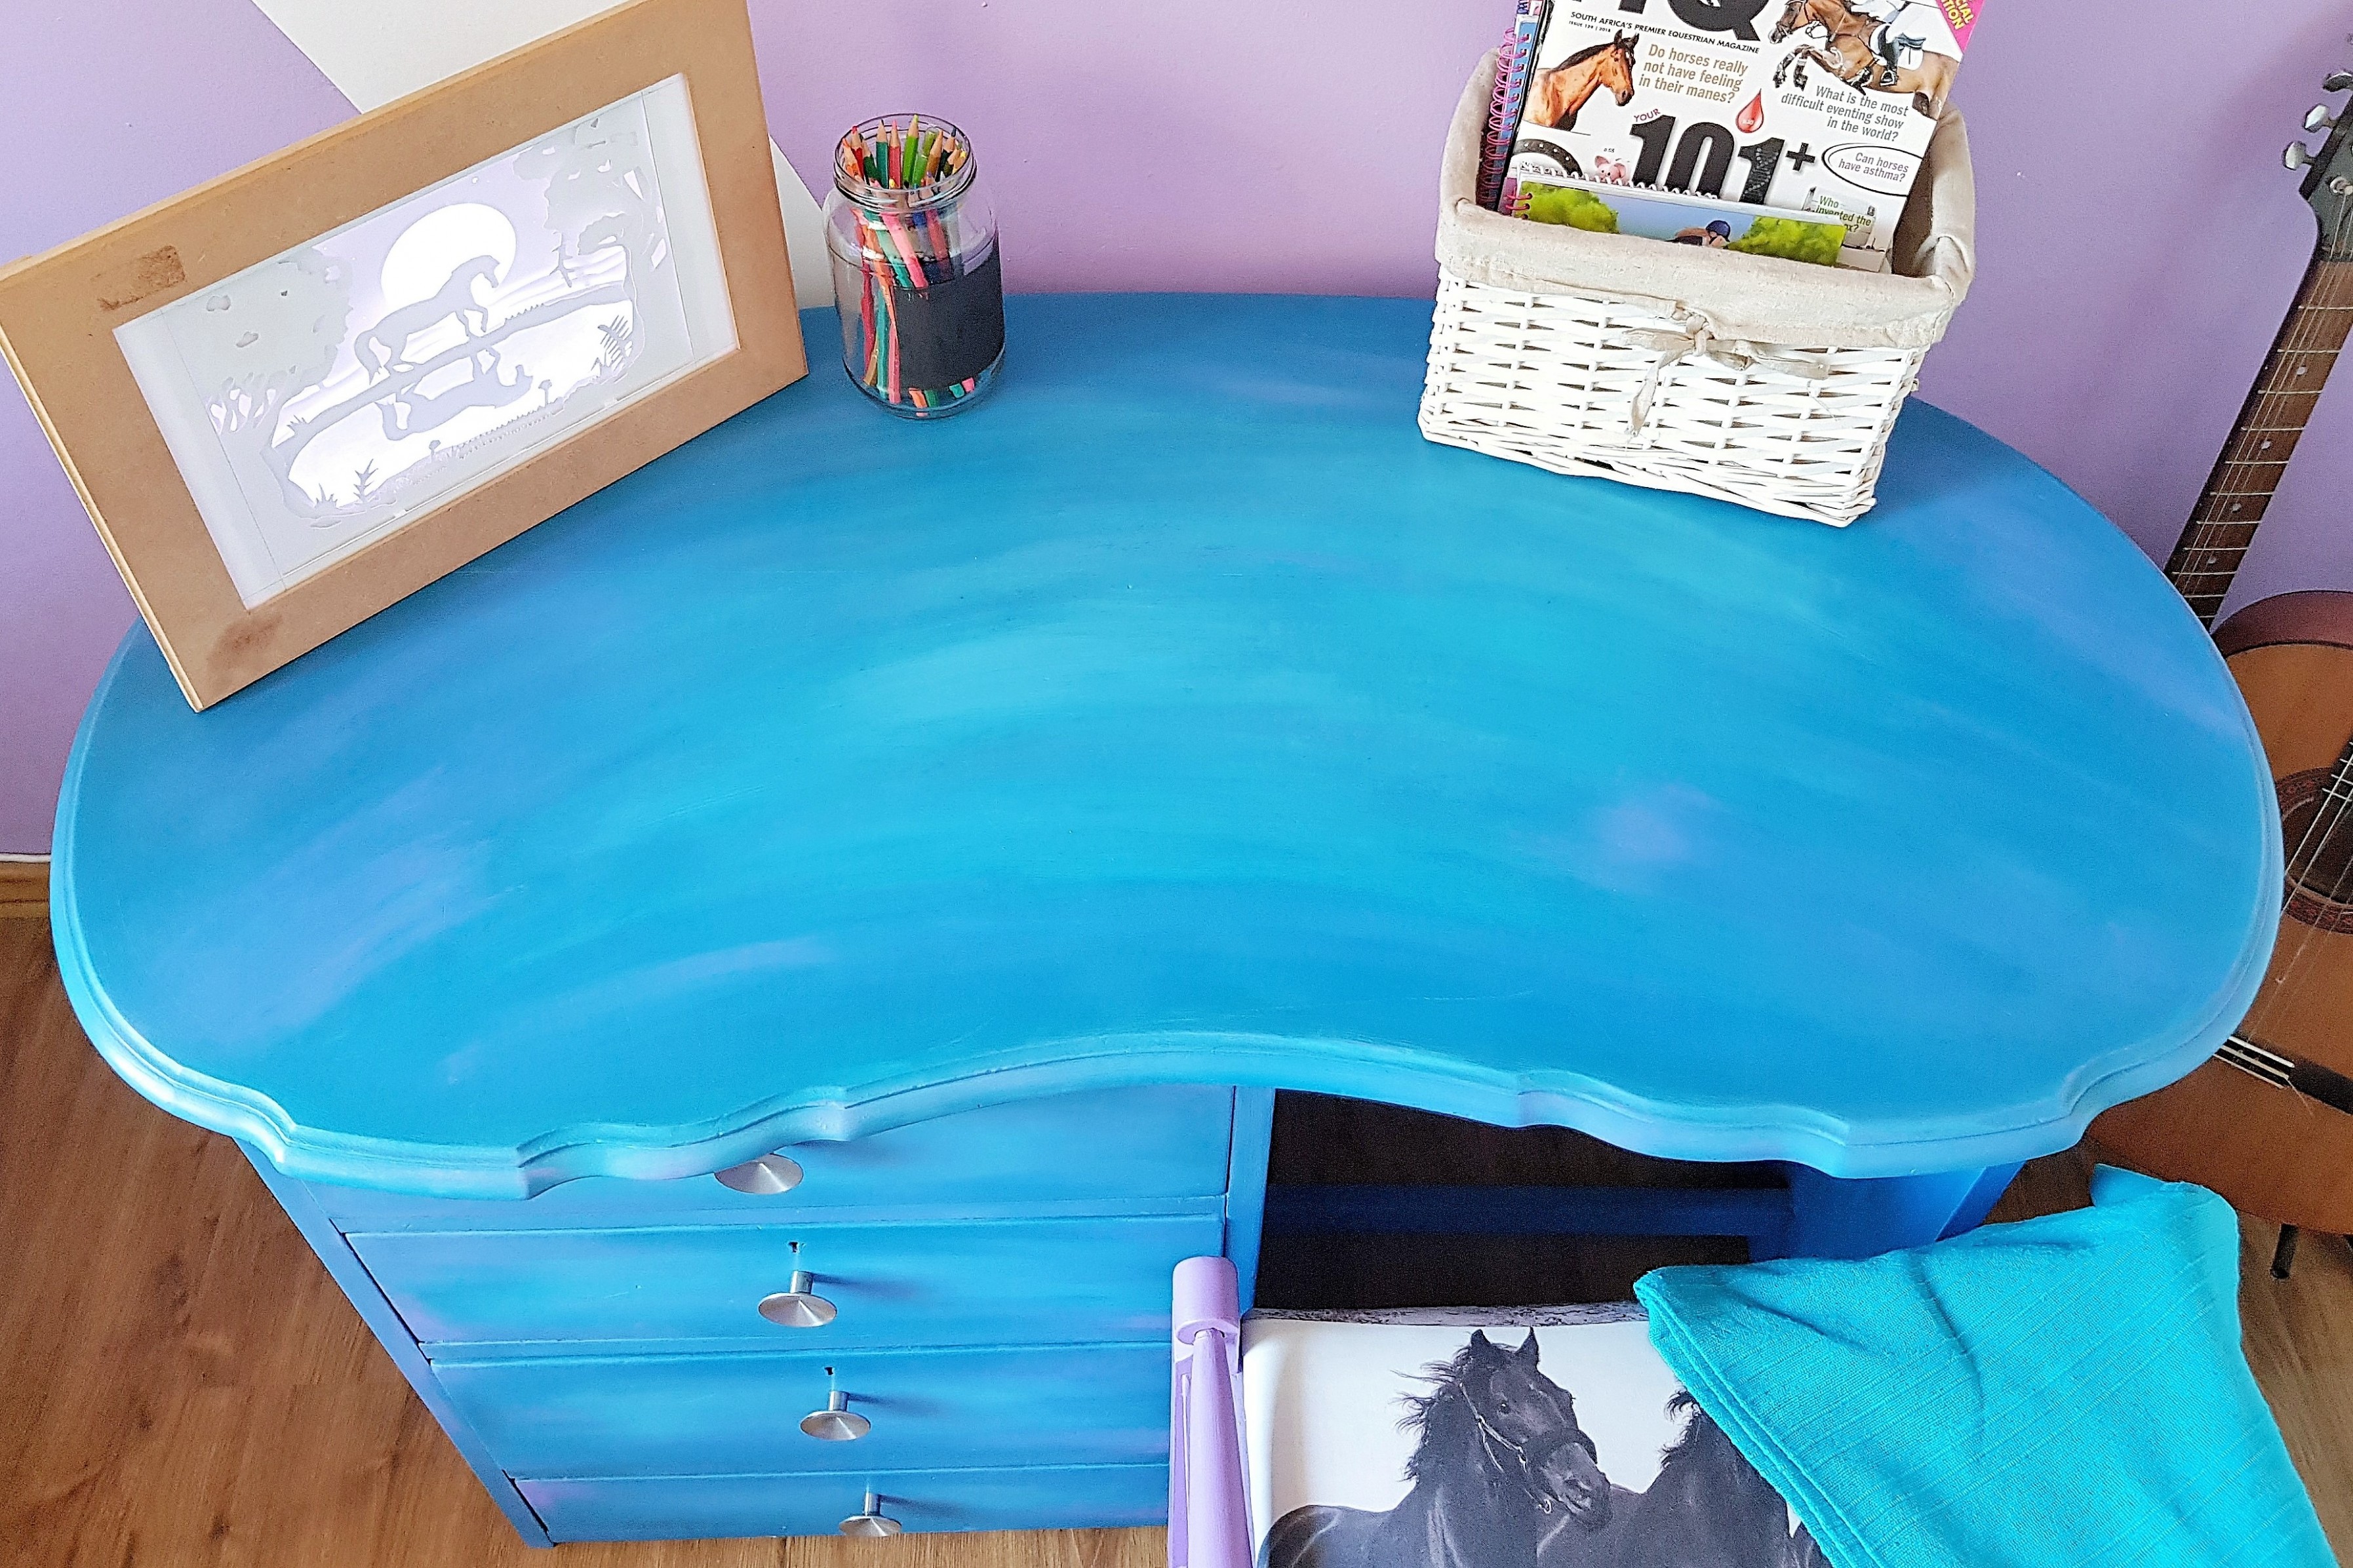 Diy: Ombre Painted Furniture Technique Using Diy Chalked Paint ..